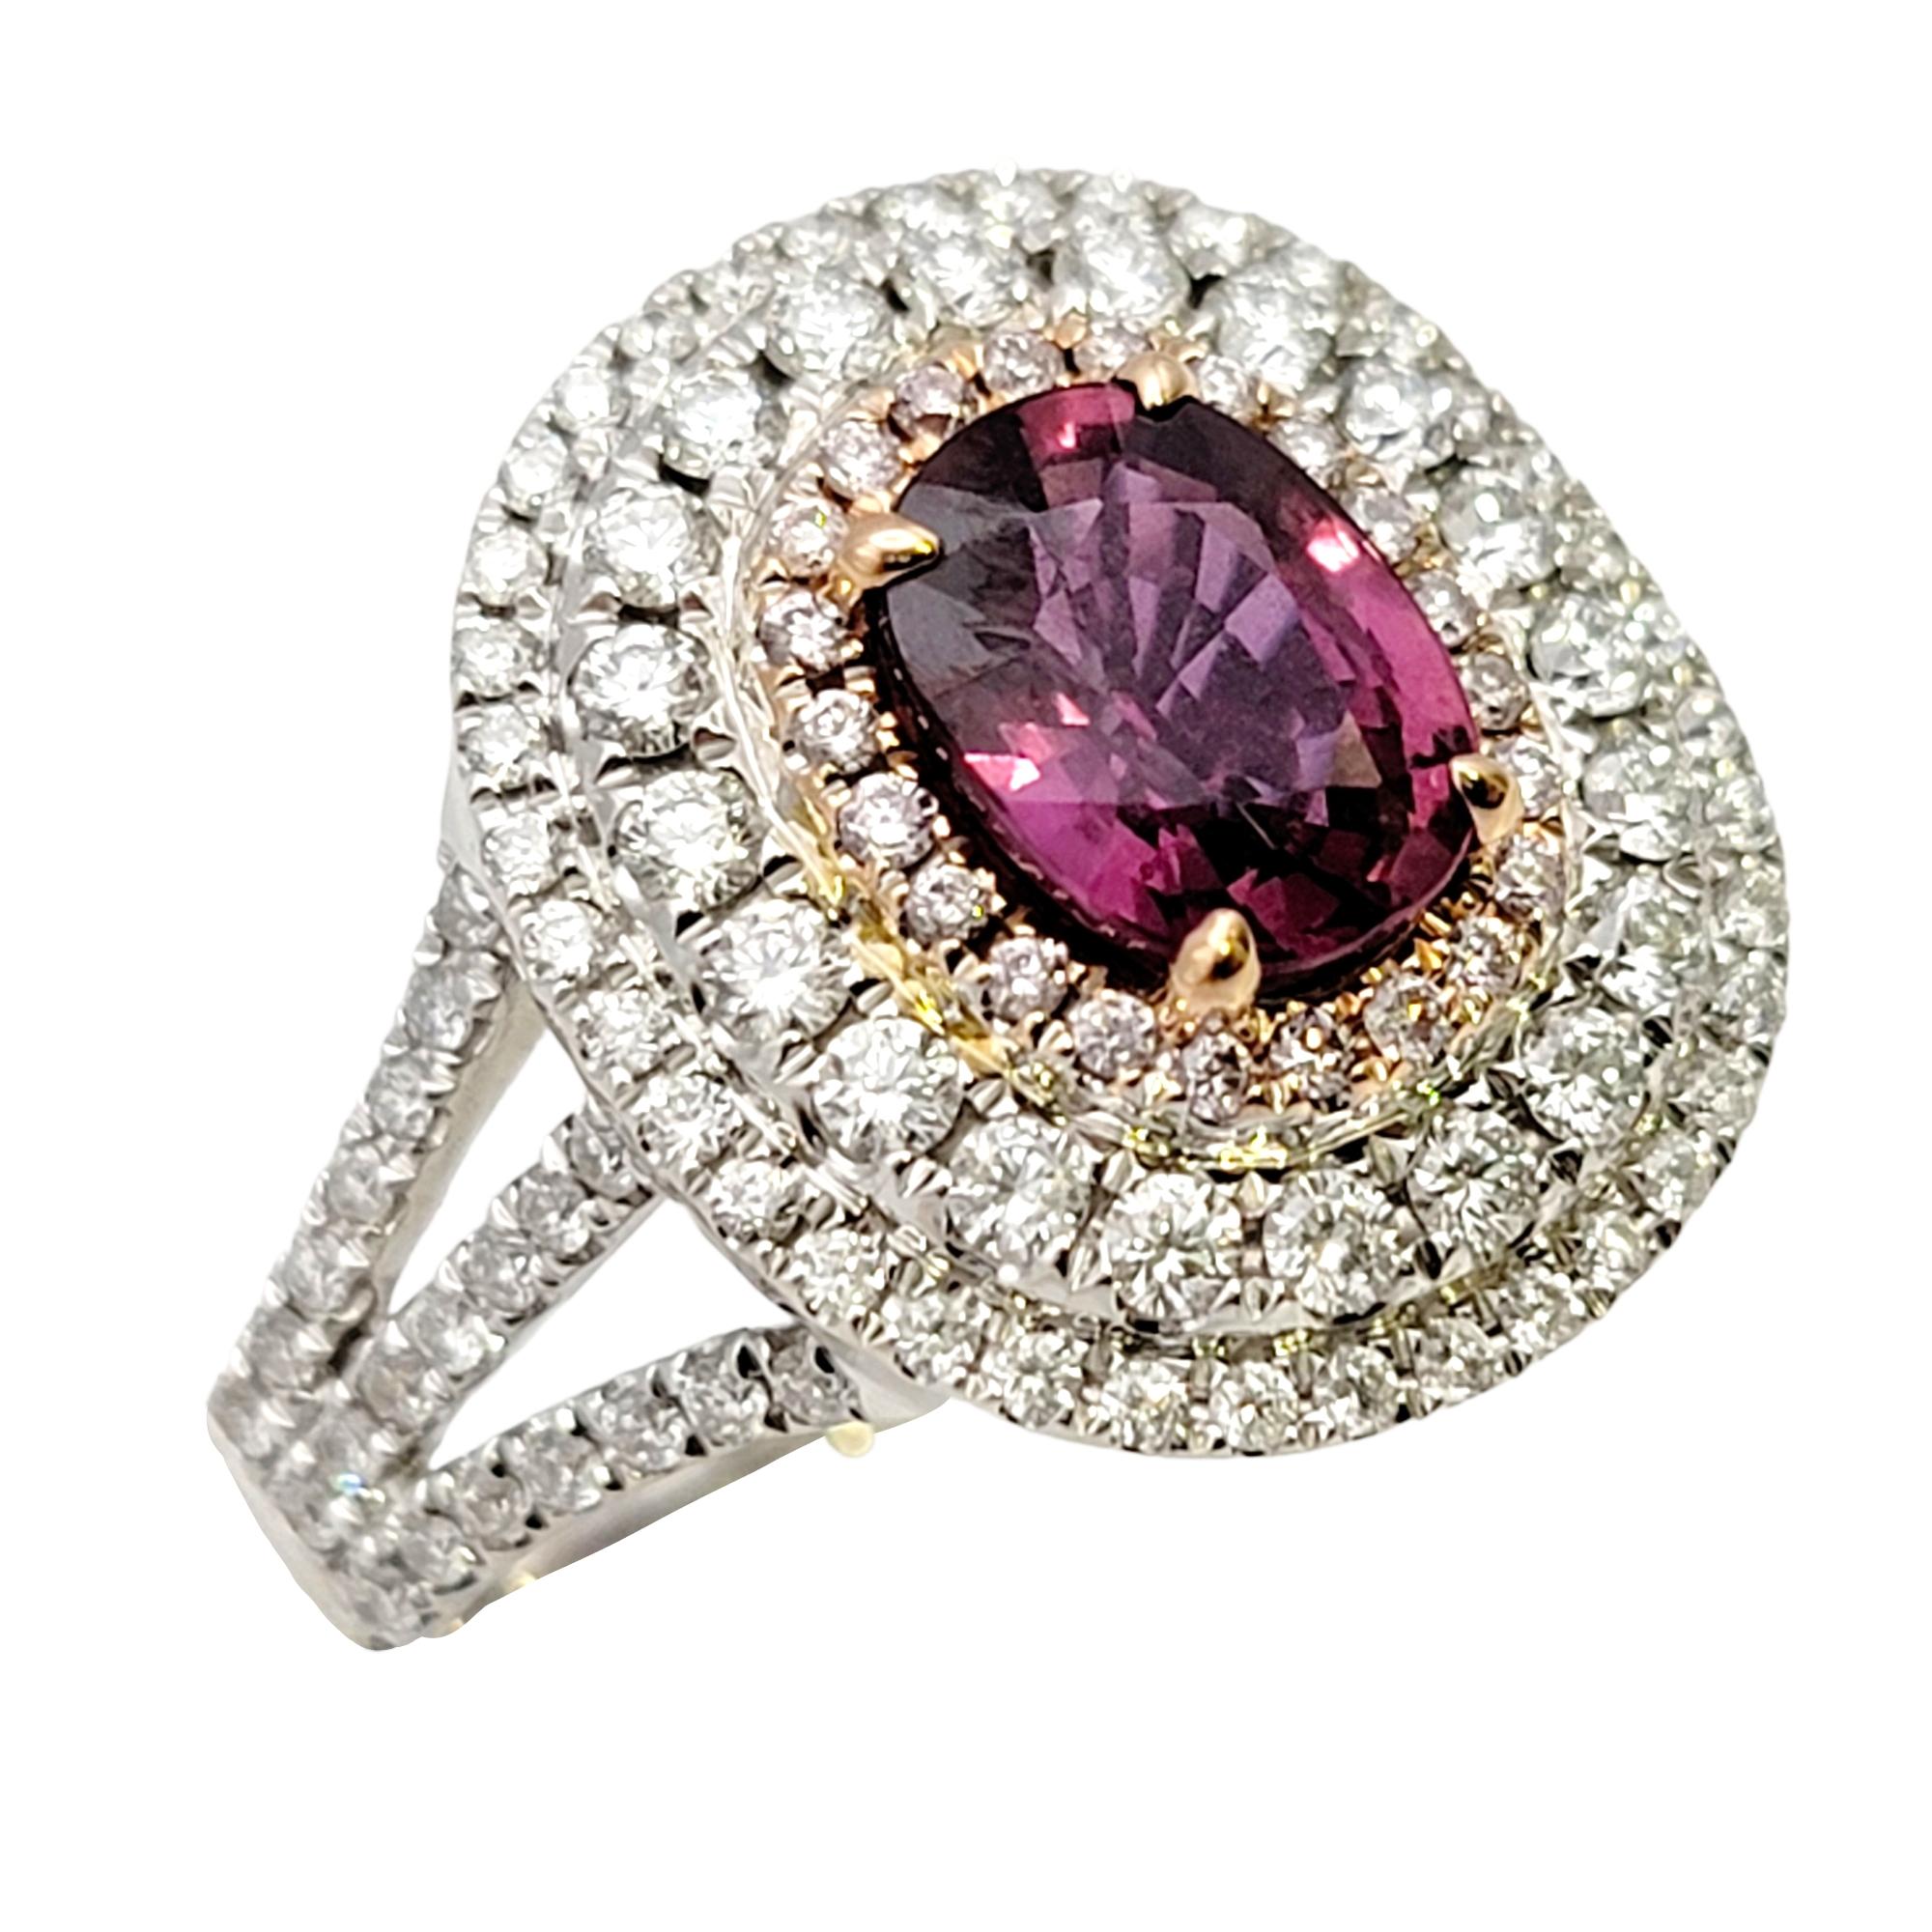 Ring size: 7

This stunningly sparkly diamond and purple sapphire ring absolutely lights up the finger. The dazzling diamond detail fills the finger, making it shine from every angle, while the bright pop of color from the sapphire adds some lovely